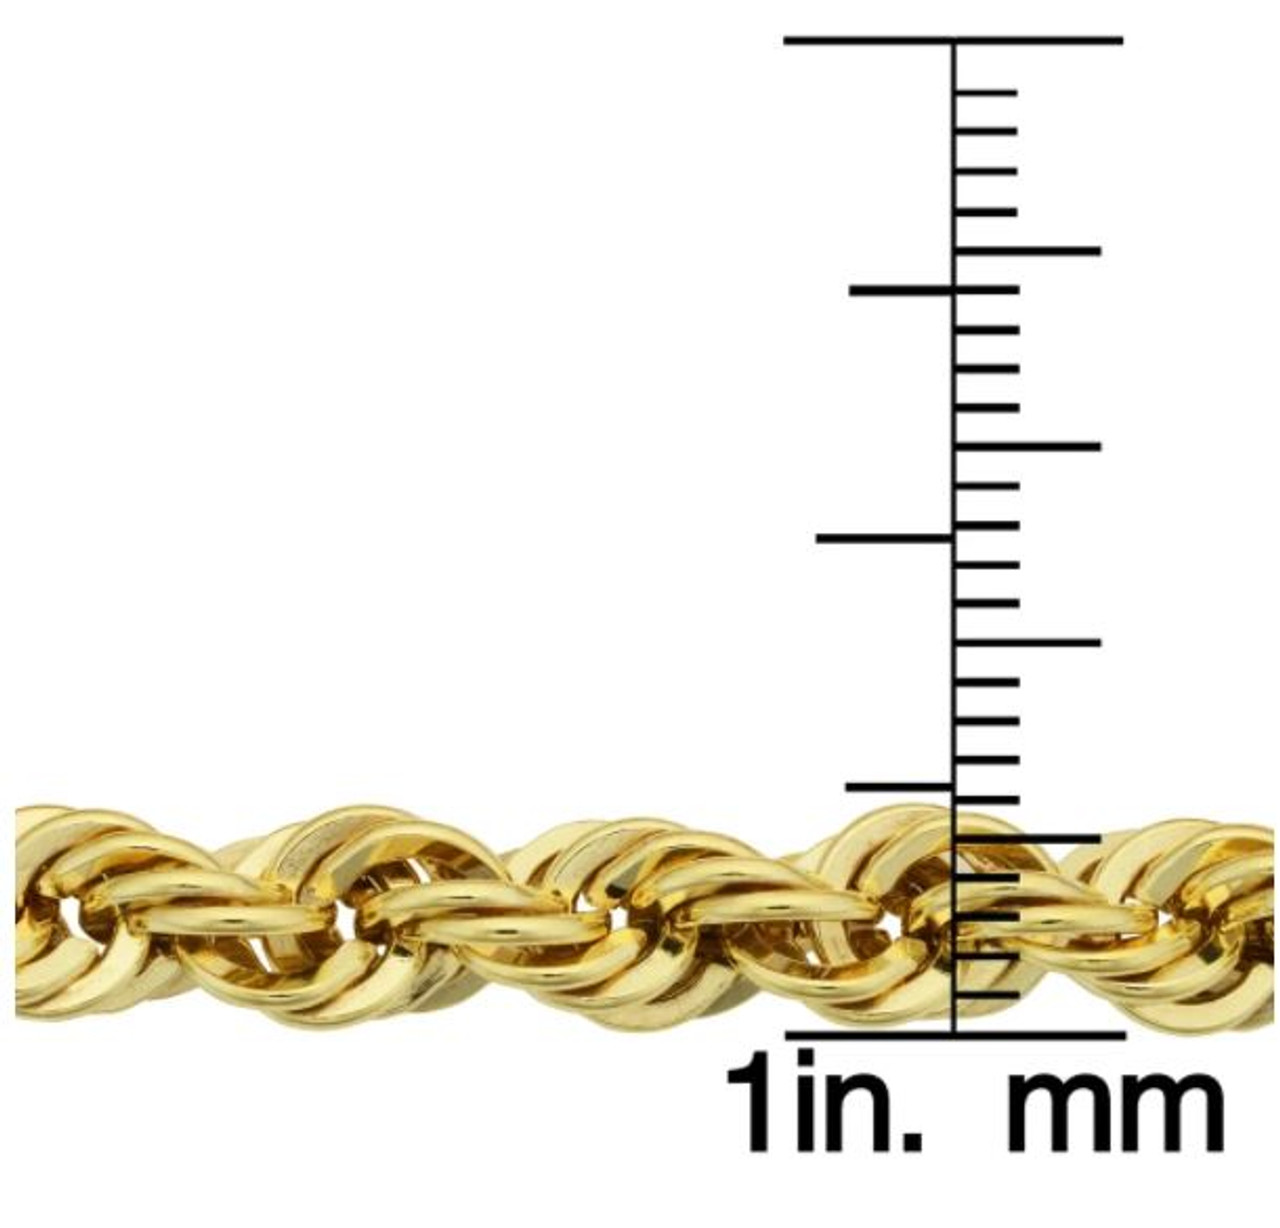 14k Yellow Gold Solid Box Link Chain 2.5 mm